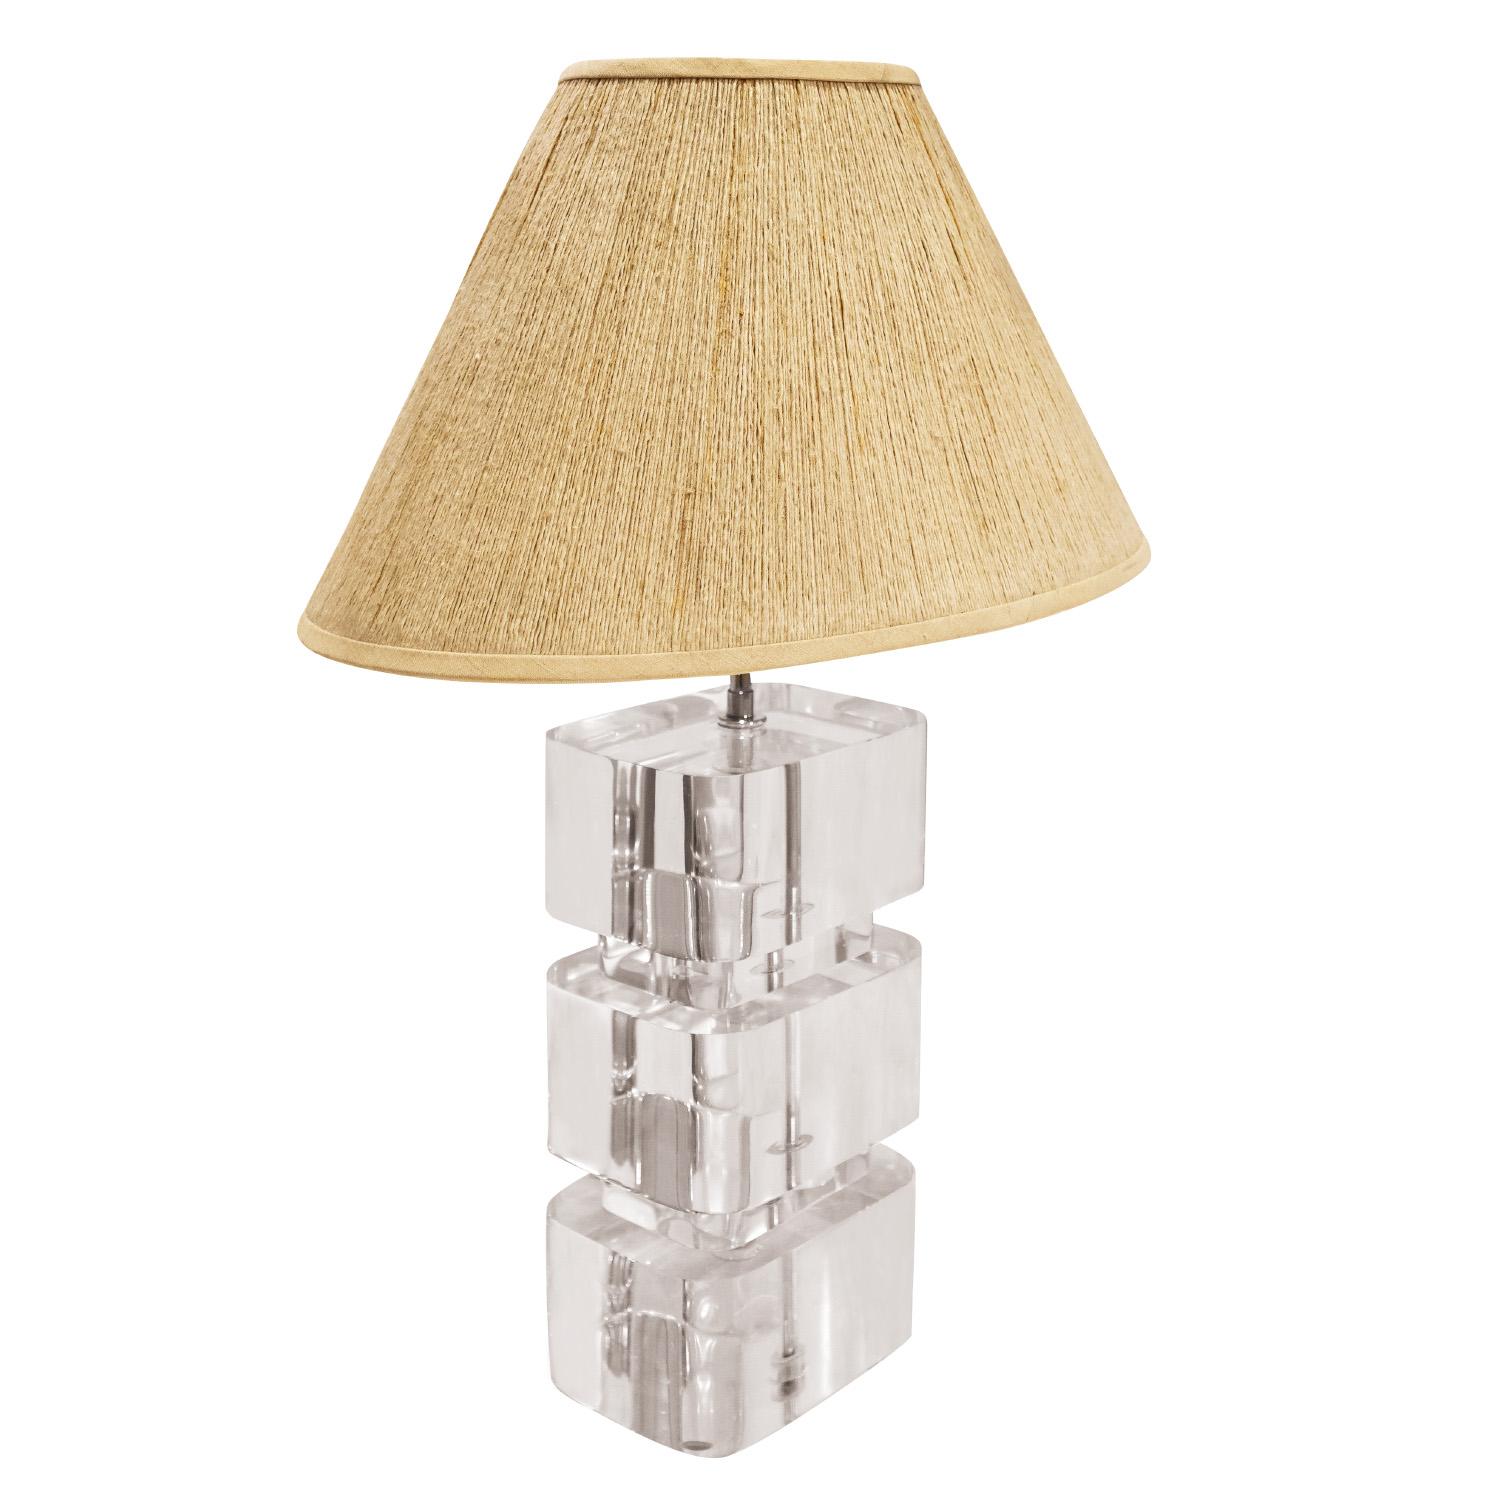 Iconic table lamp with stacked solid lucite slabs with radius corners and chrome hardware and double socket assembly by Karl Springer, American 1980's.  This lamp comes with the original string shade.  A timeless Karl Springer design.